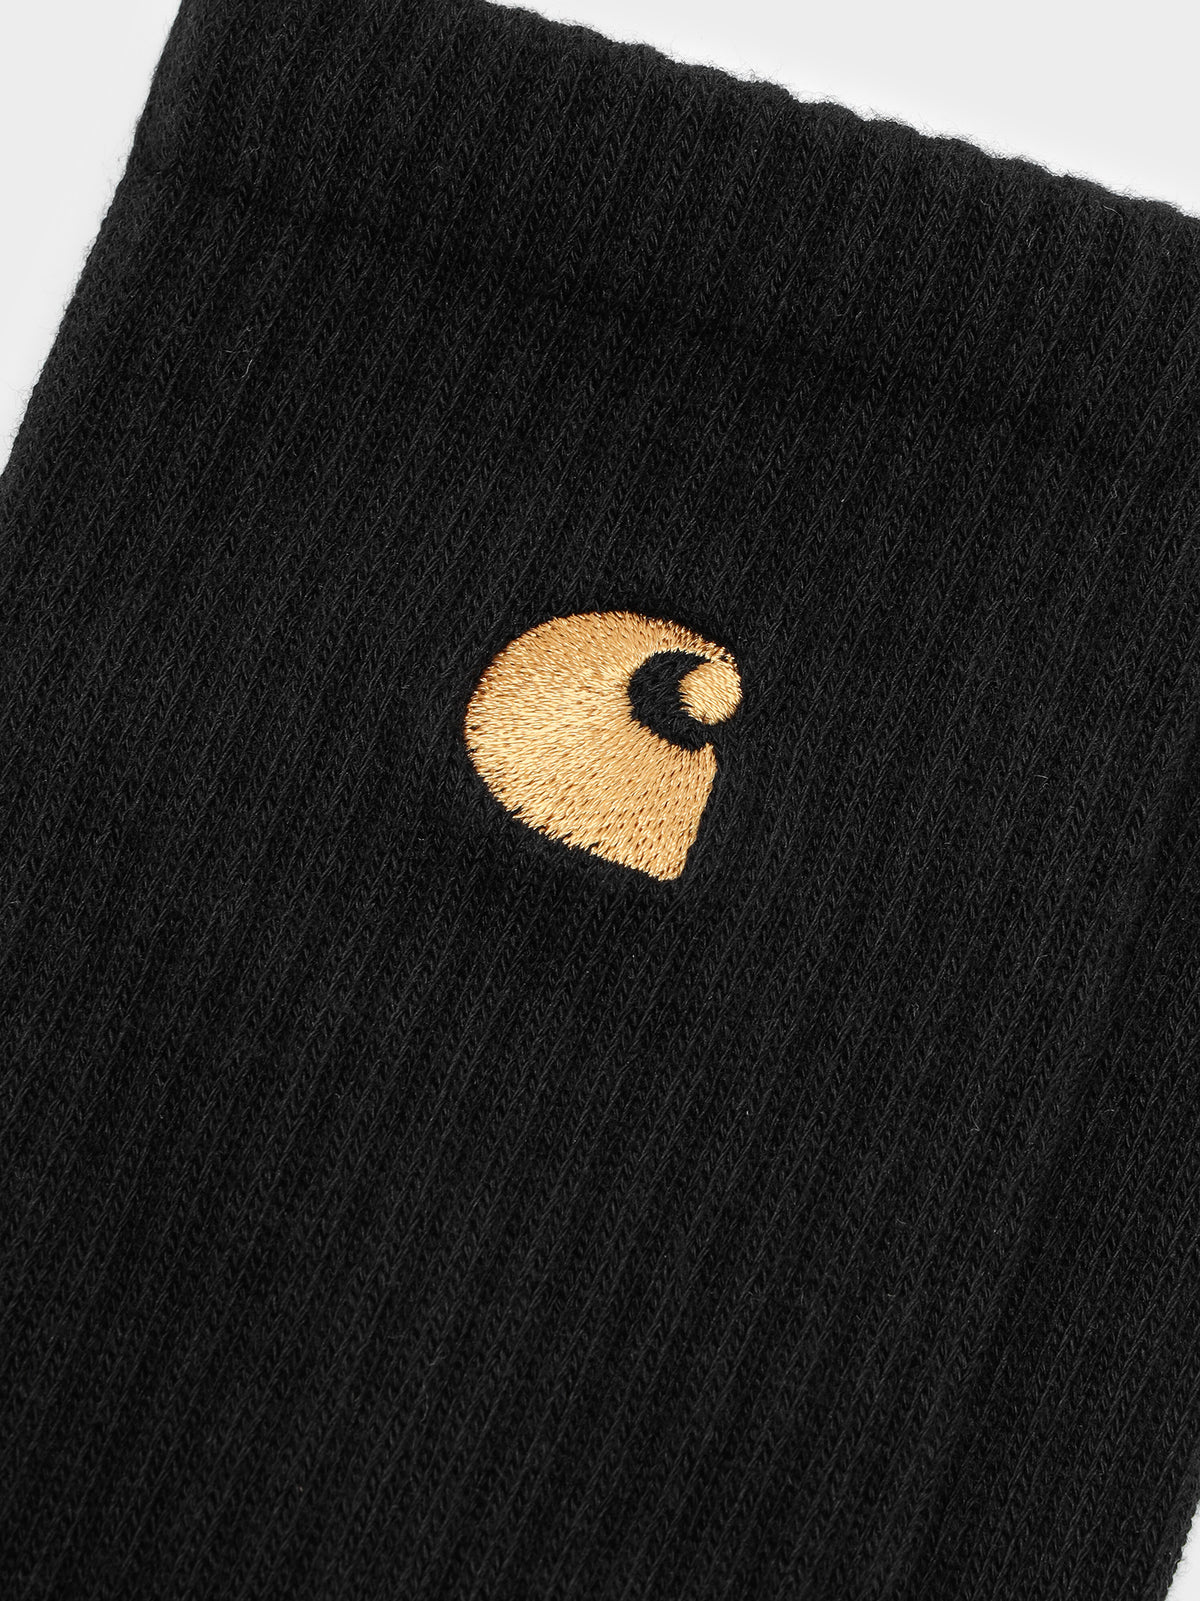 One Pair of Chase Socks in Black &amp; Gold